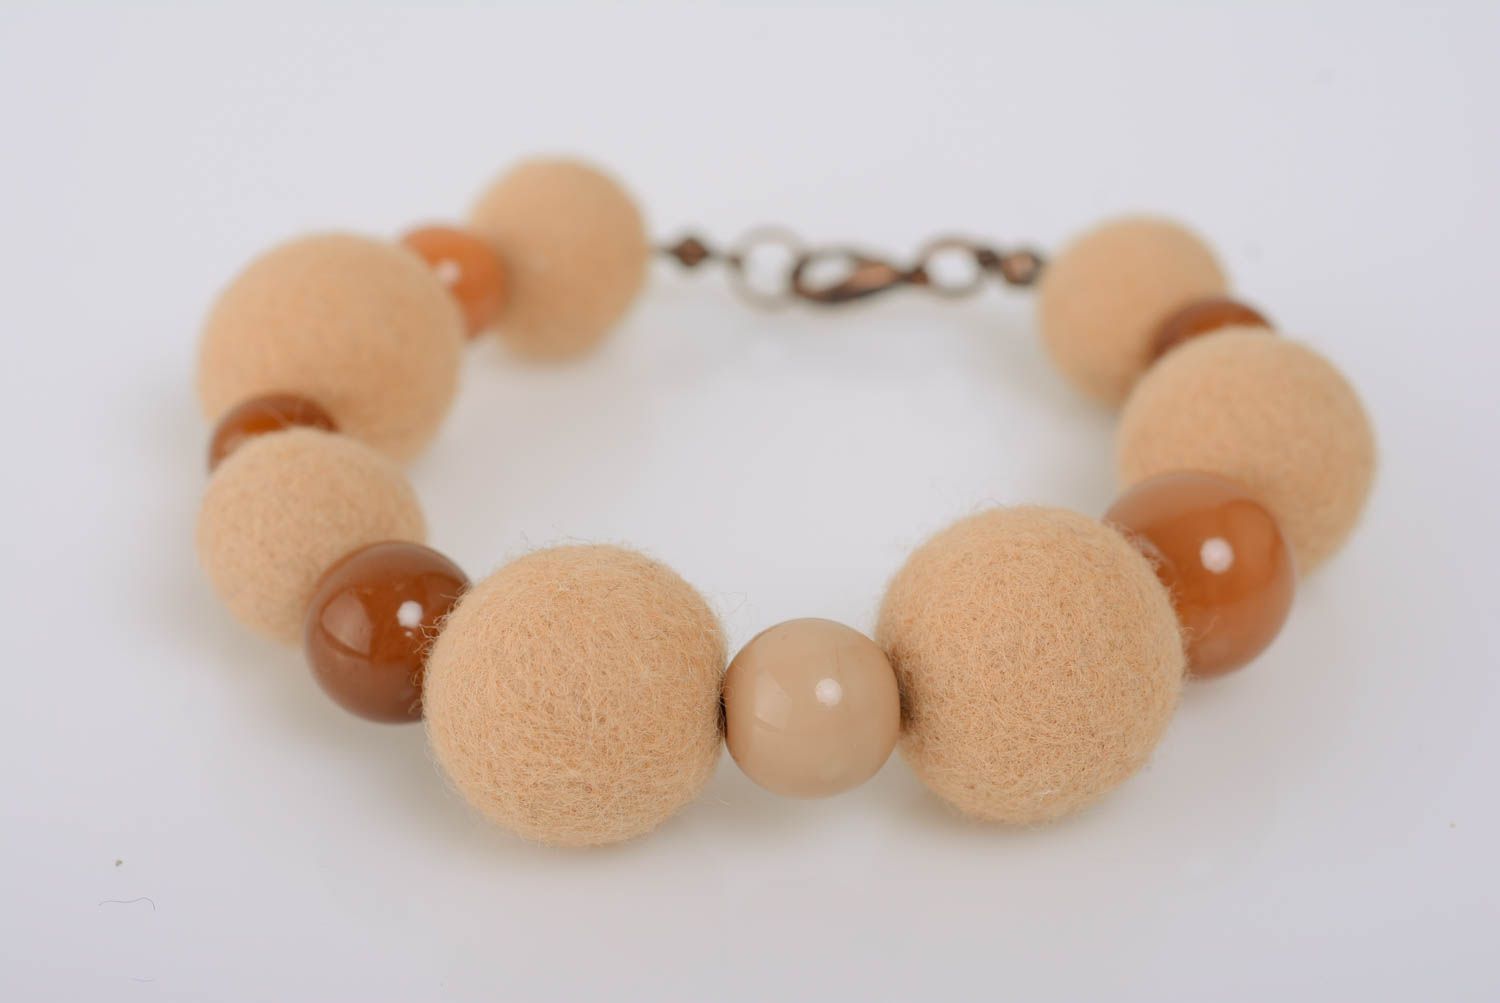 Bracelet made of felted wool handmade with ceramic beads designer accessory photo 1